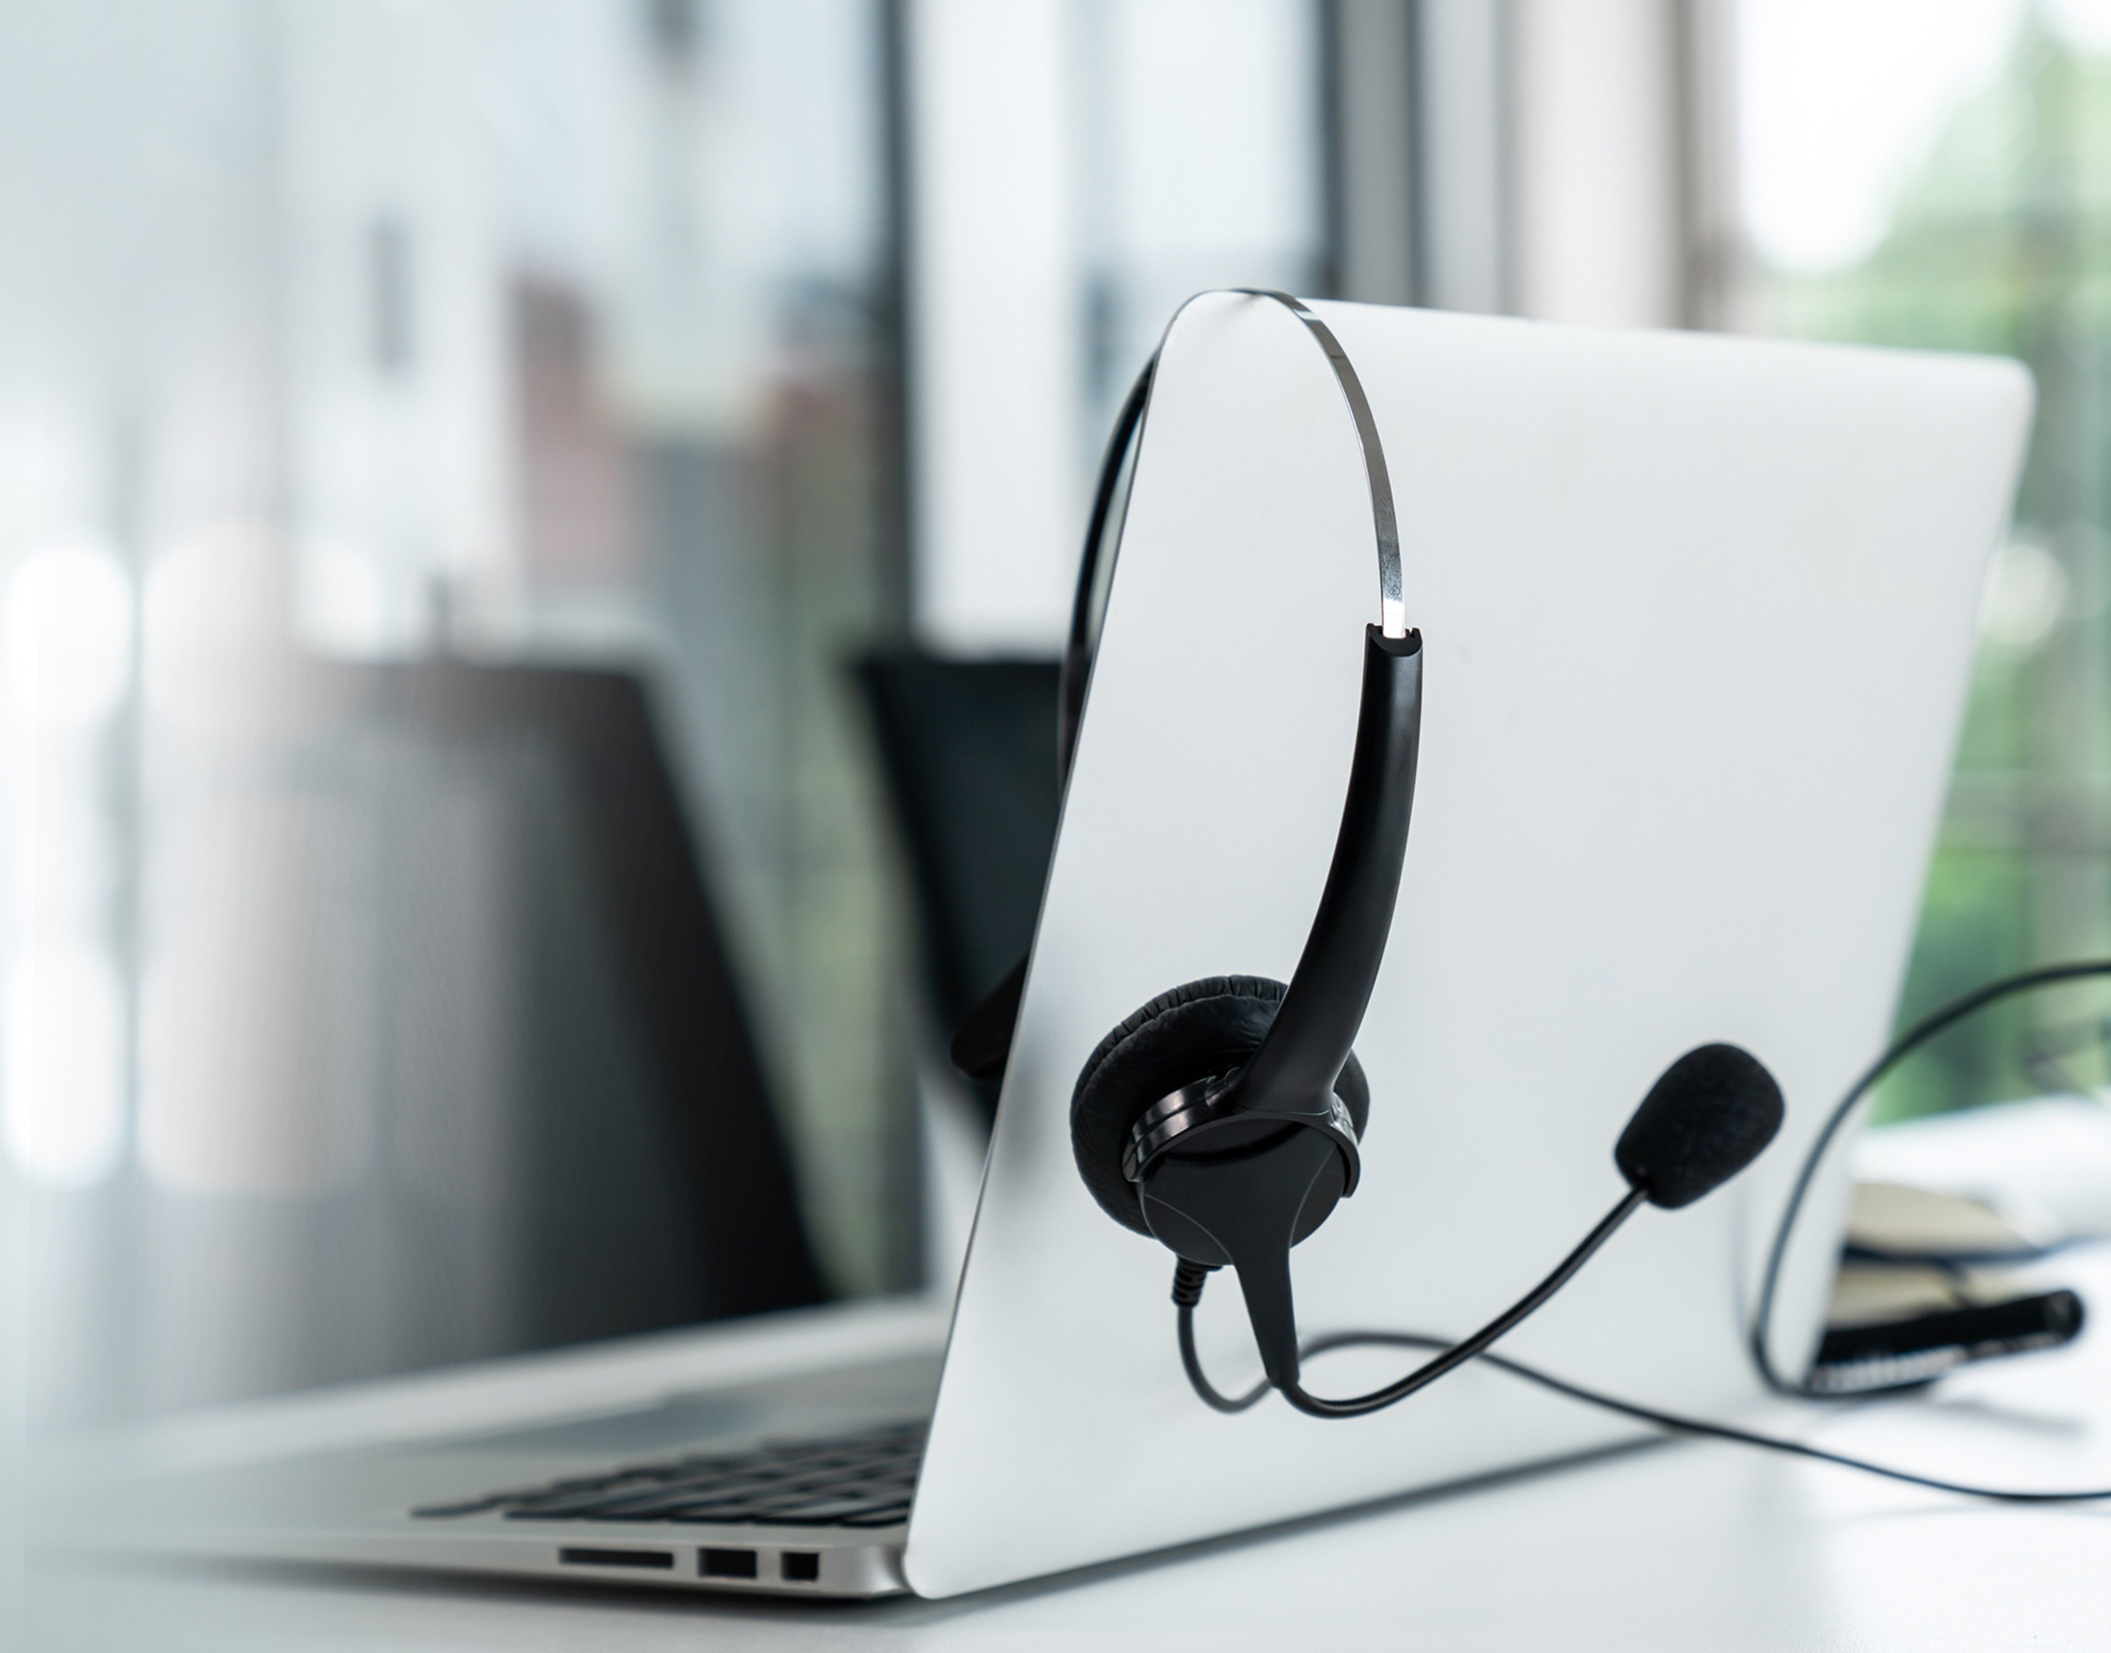 Headset and customer support equipment at call center ready for actively service . Corporate business help desk and telephone assistance concept .